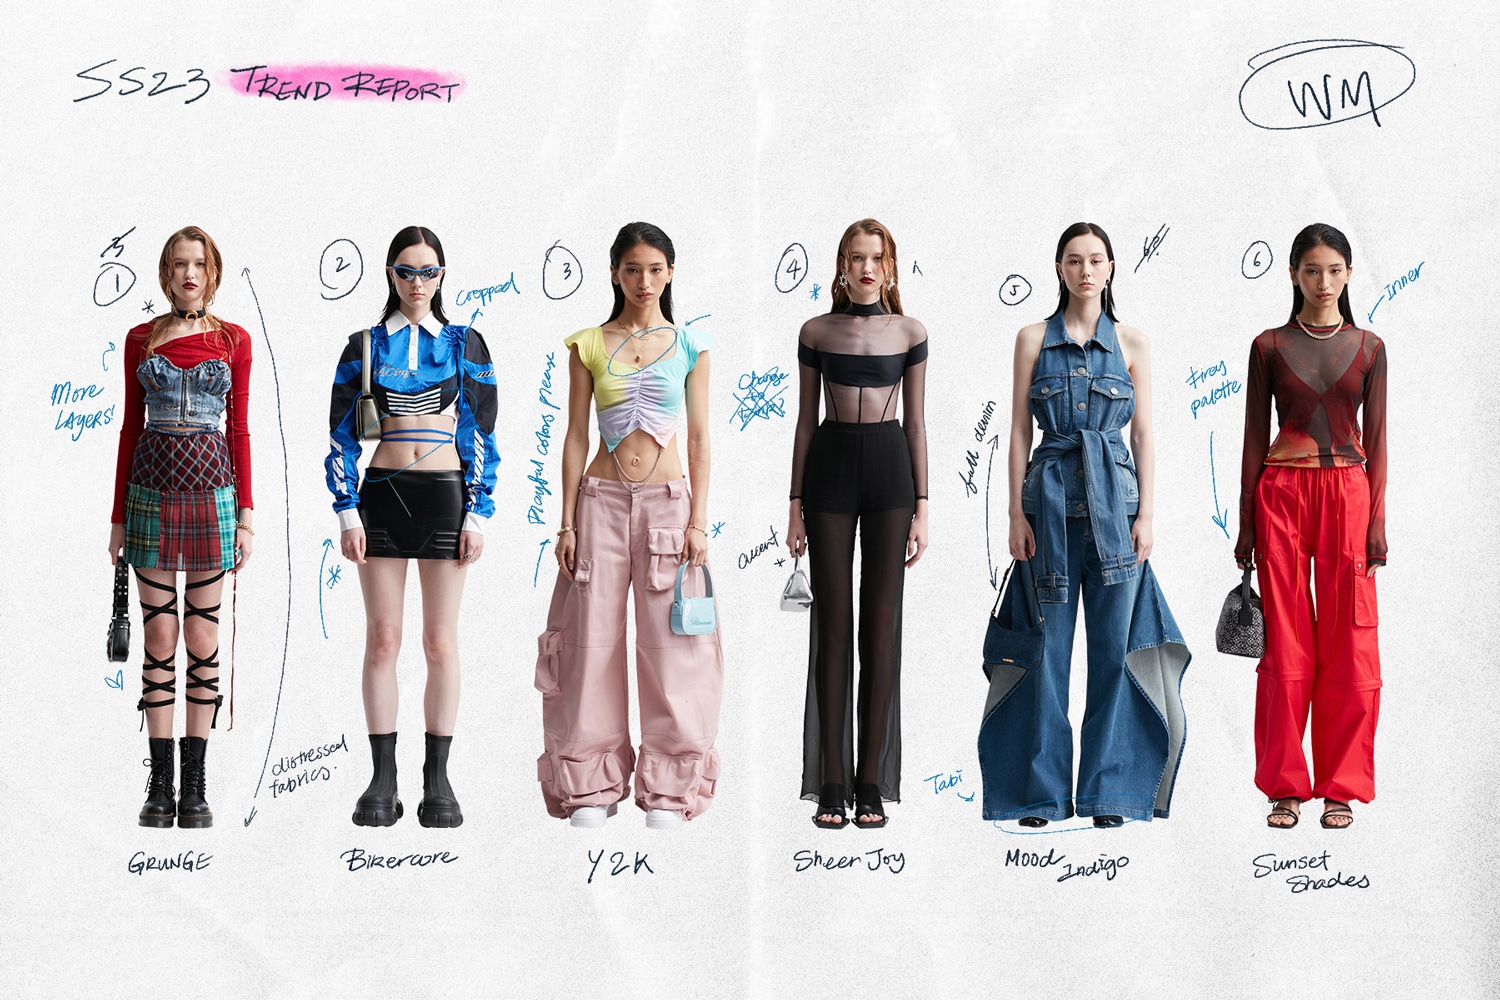 SS23 Trend Report